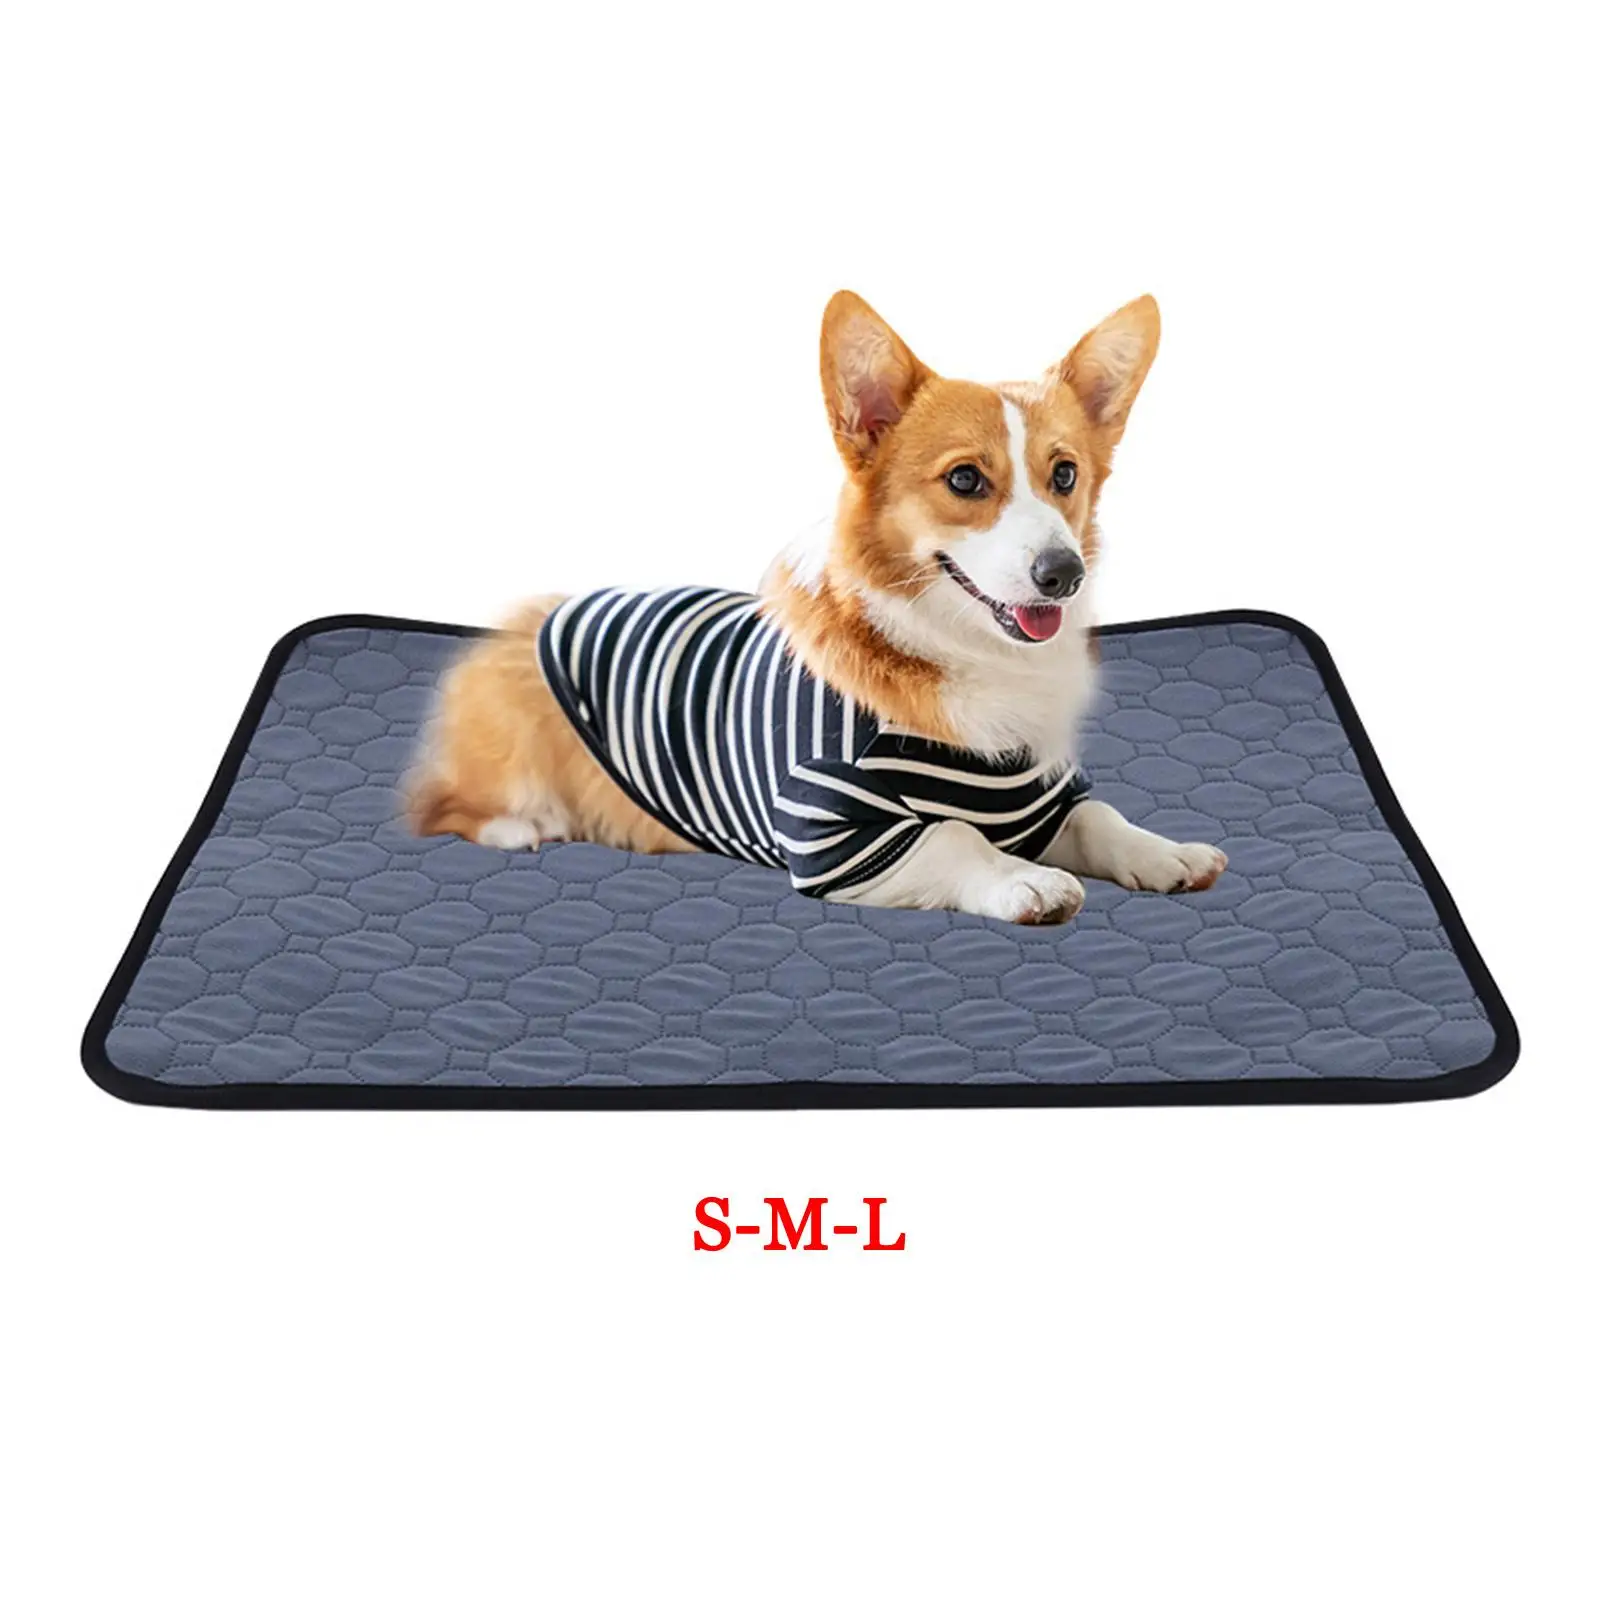 Pee Pad Urine Mat Reusable Breathable for Hotel Travel Pet Incontinence